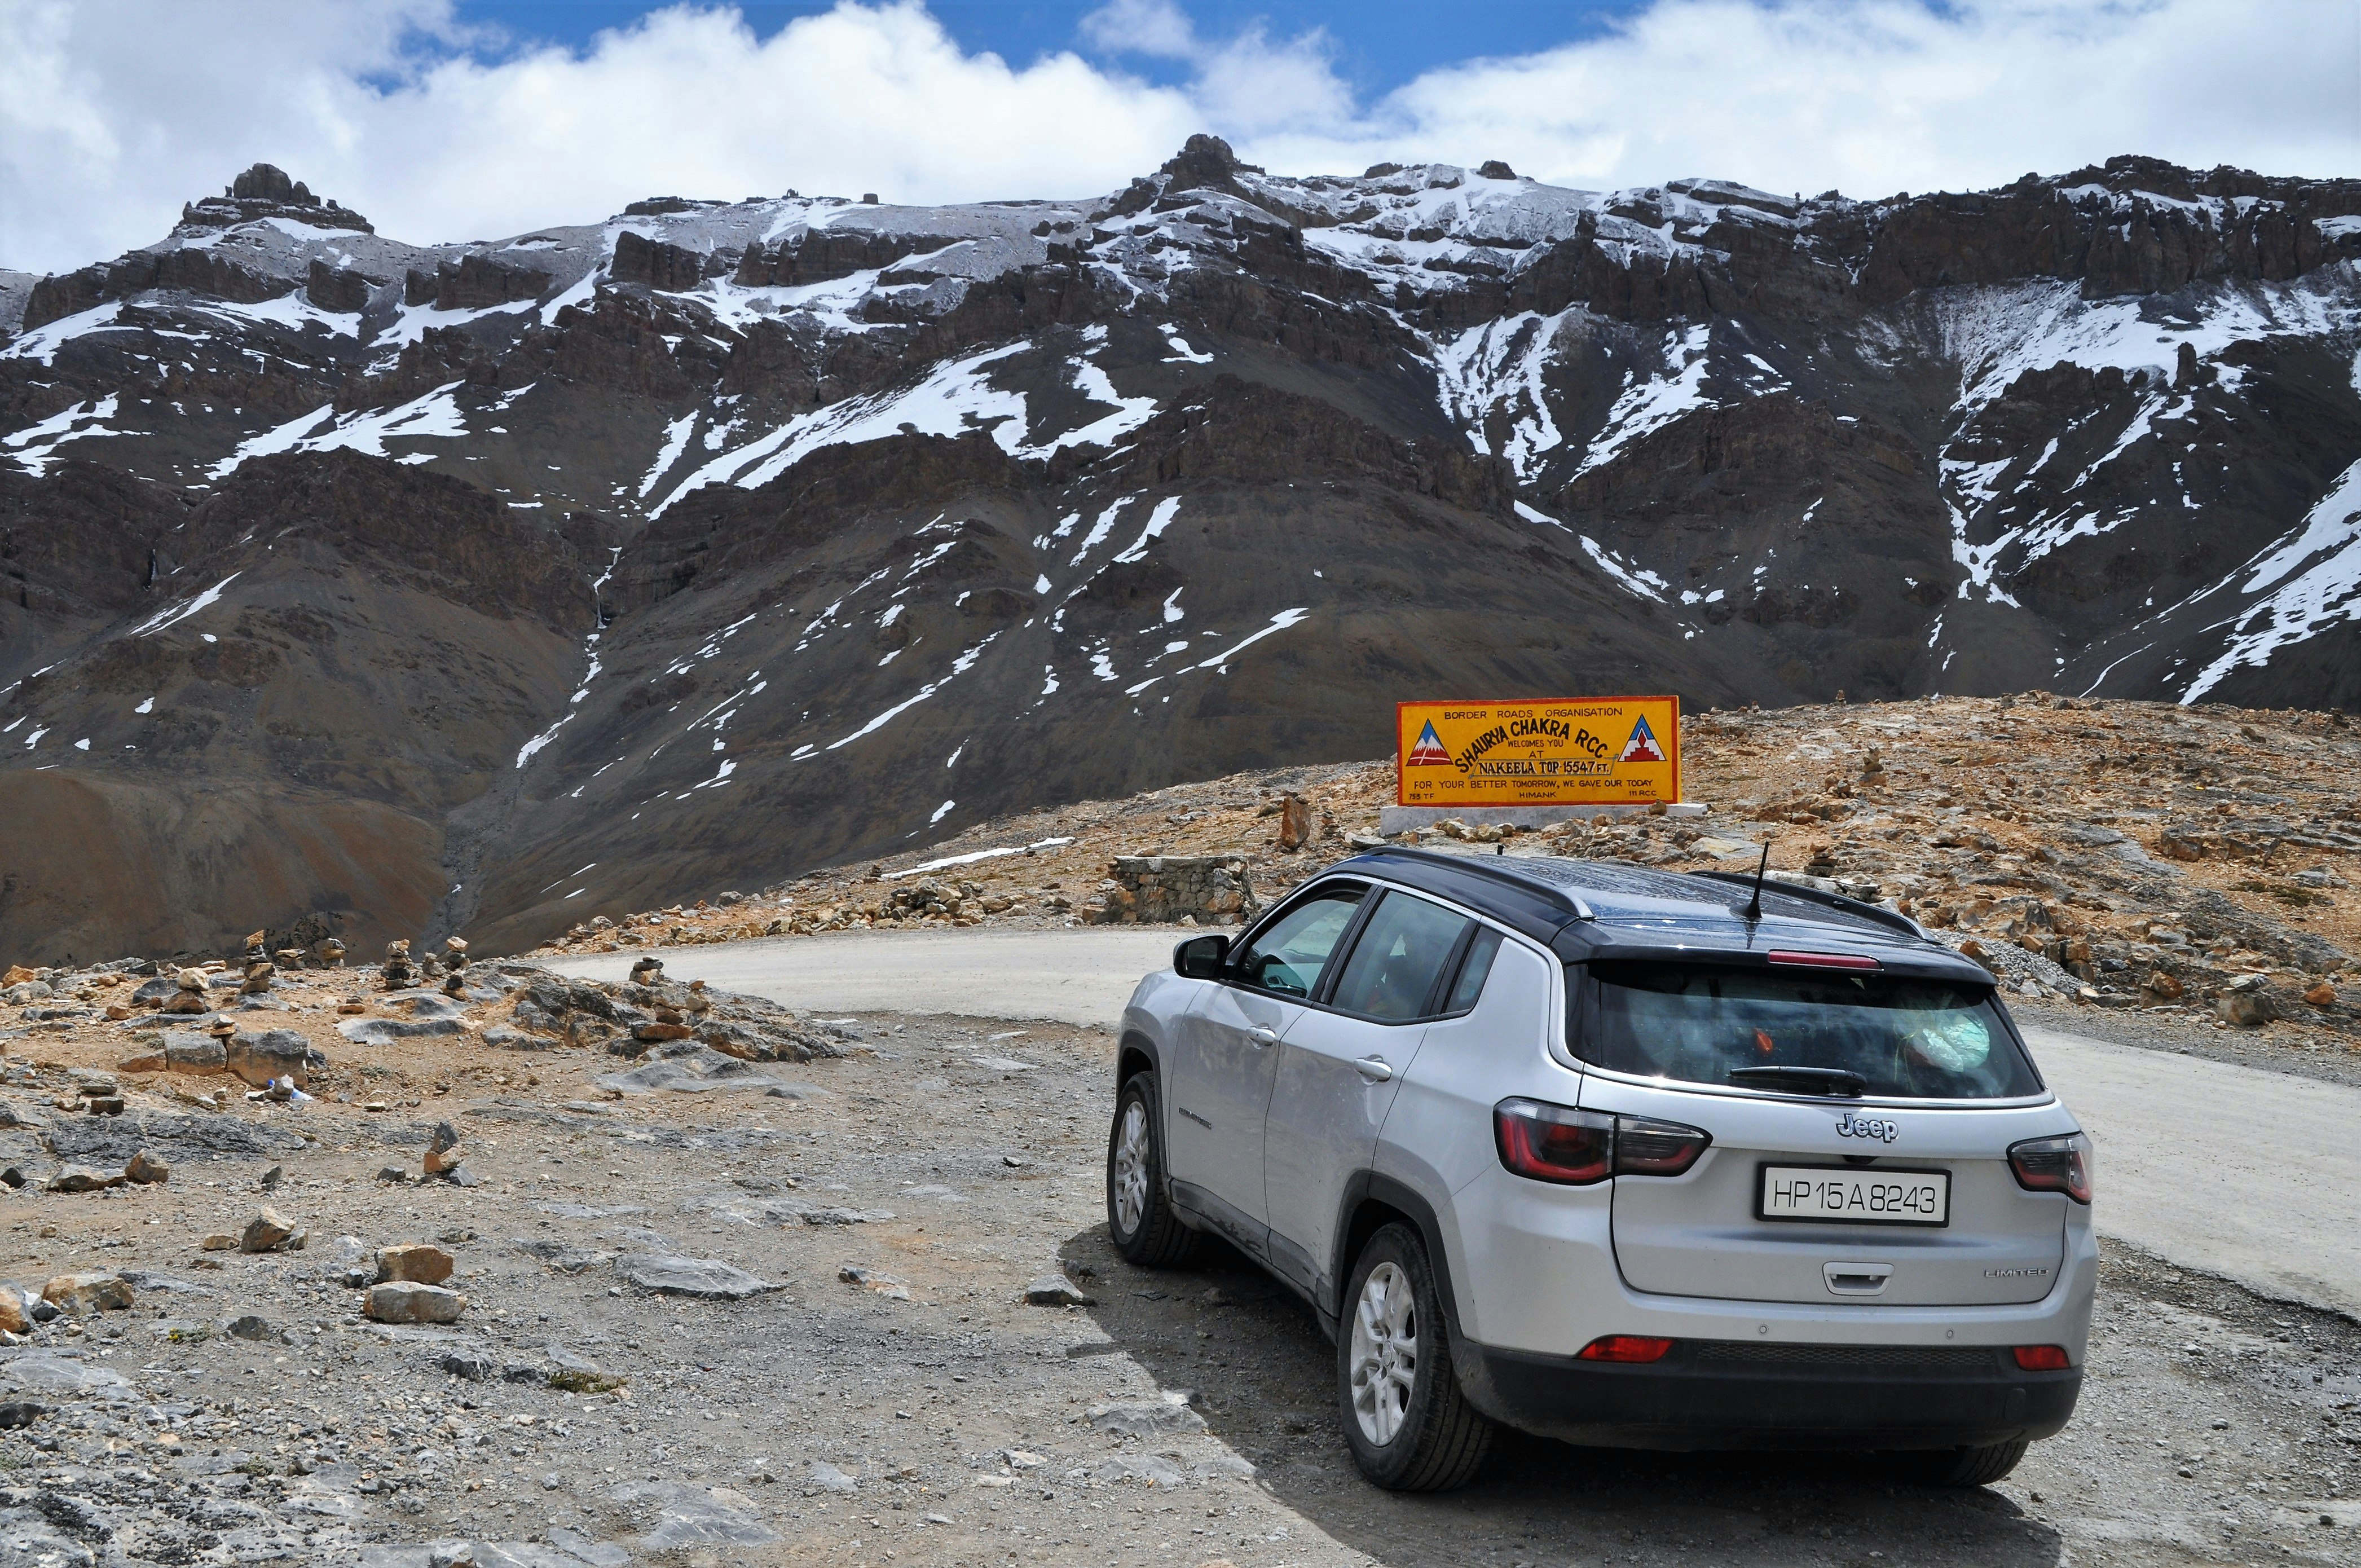 Nakee La is a high mountain pass at an elevation of 15,647ft  above the sea level.
The pass is traversed by the Manali-Leh-Highway, on the way to Manali from Taglang La. Nakee la Pass is third of the five passes to be crossed while traveling from Manali to Leh. It is between Sarchu and Pang. You've got to be really careful with the wheels because of pathetic road conditions that could test the patience of even the most seasoned drivers. But you really deserve a medal if you've driven on the road.
But you really deserve a medal if you've driven on the road.